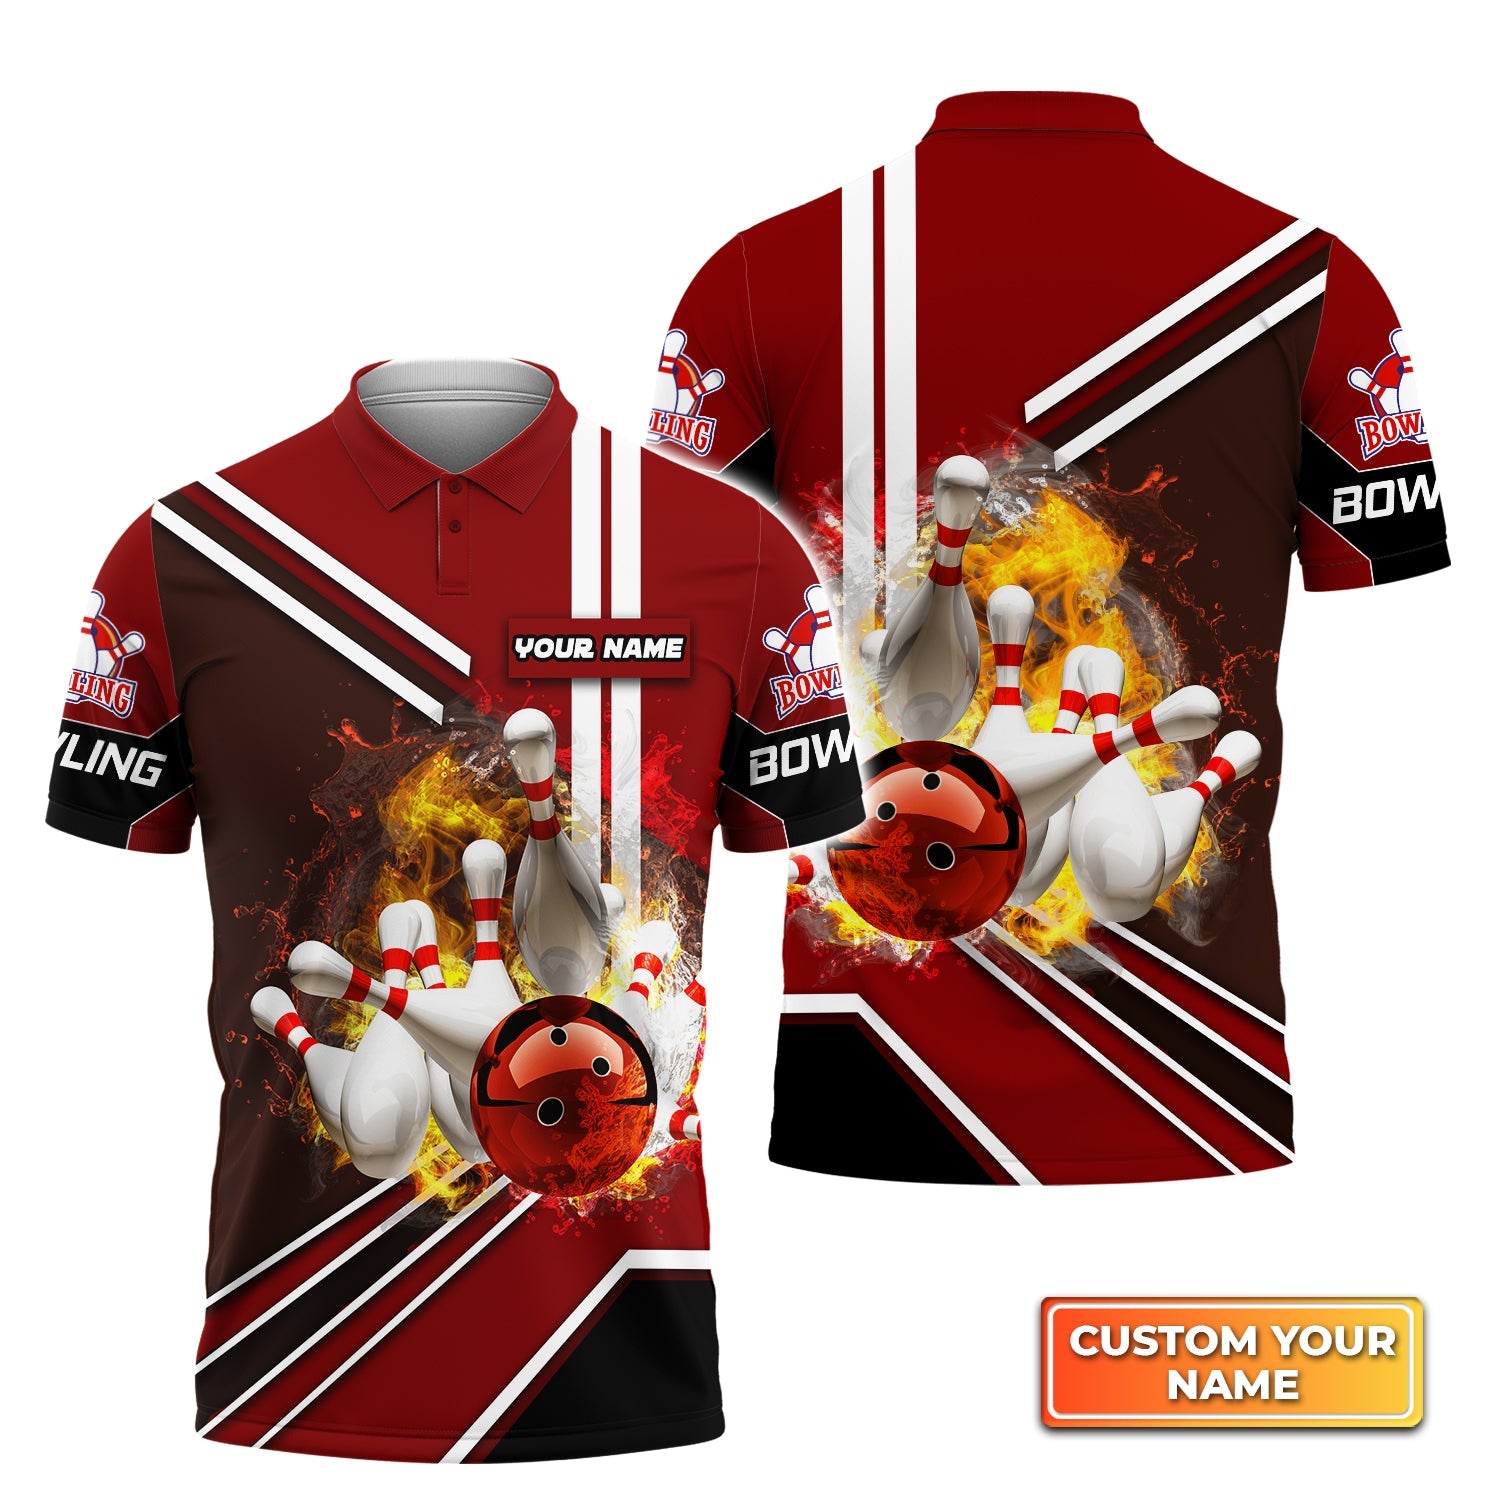 Red Bowling Ball On Fire Crashing Pins Personalized Name 3D Polo Shirt